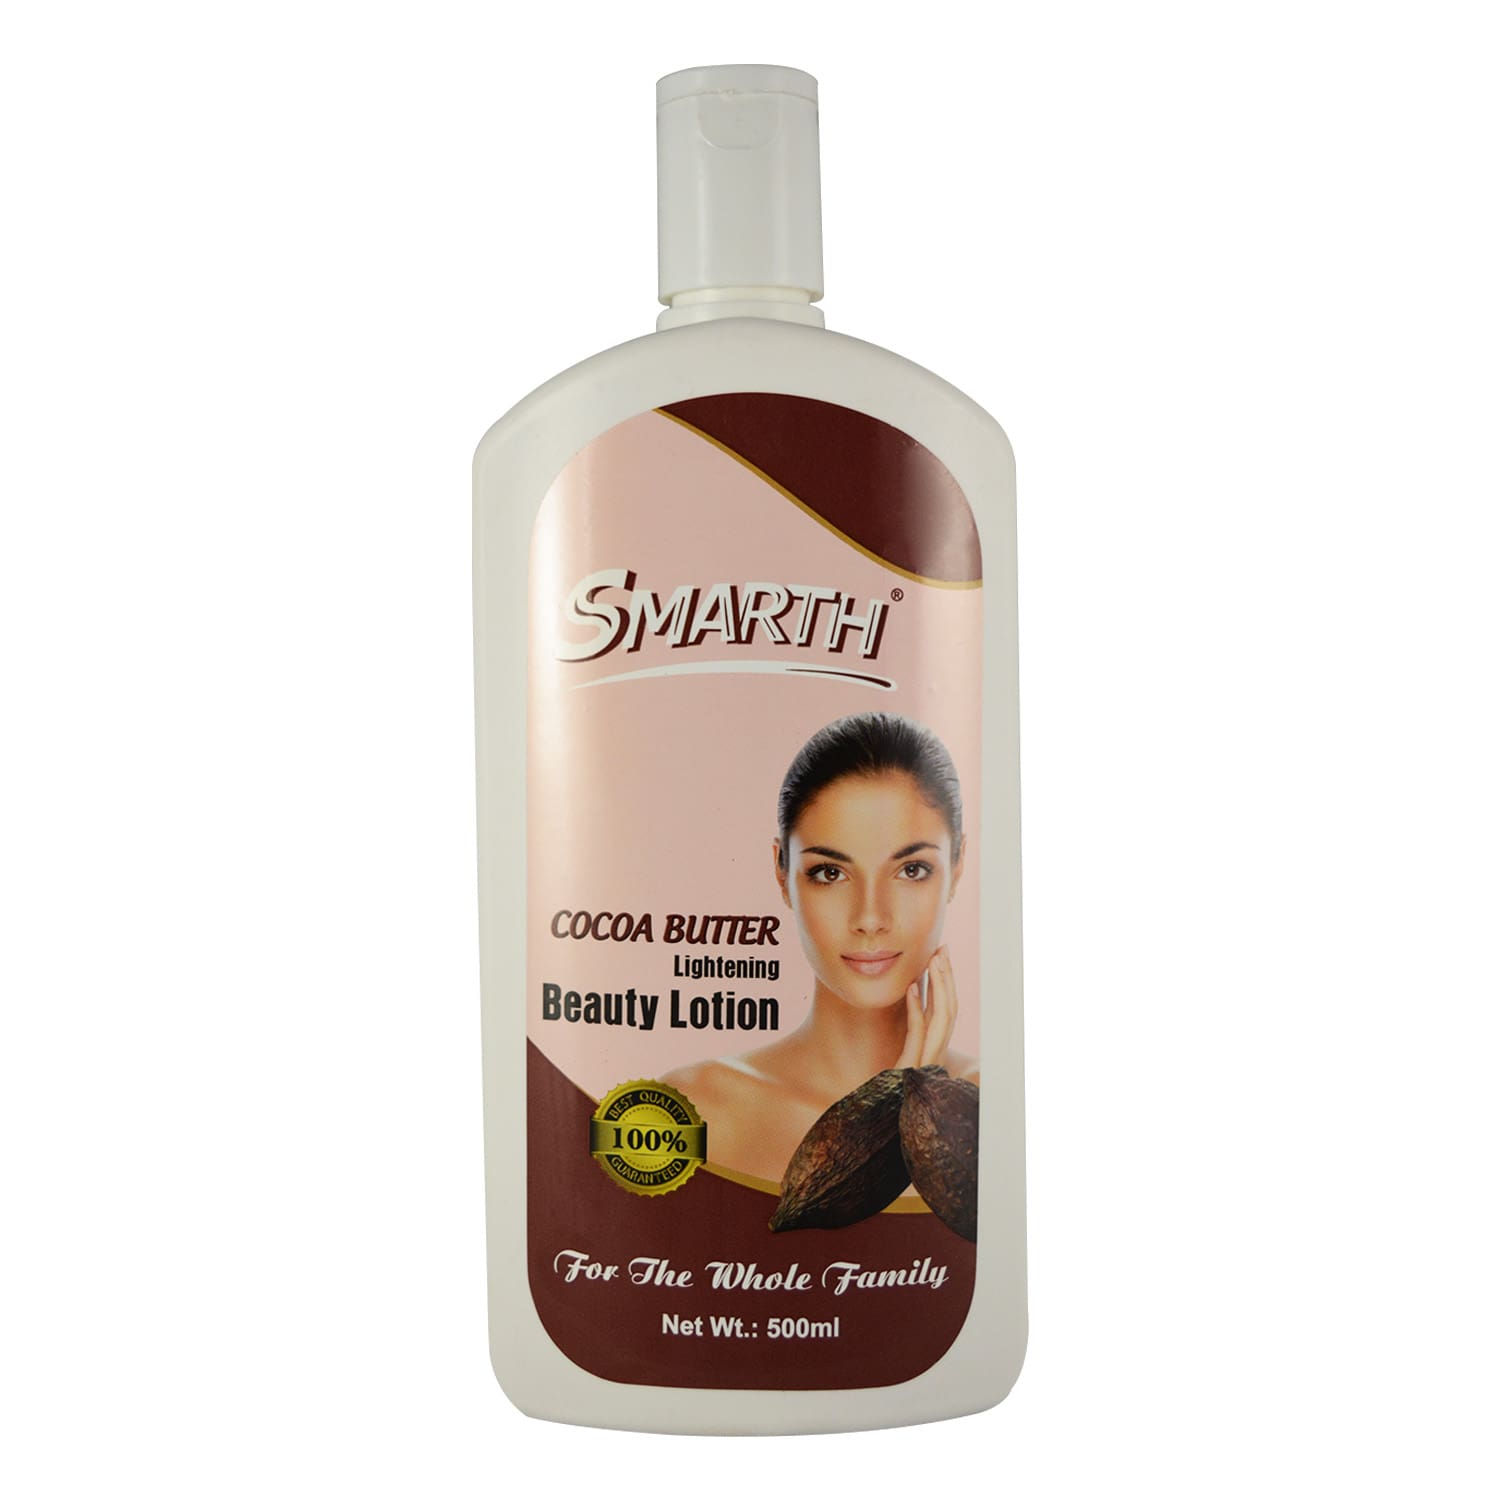 Cocoa Butter Lightening Beauty Lotion